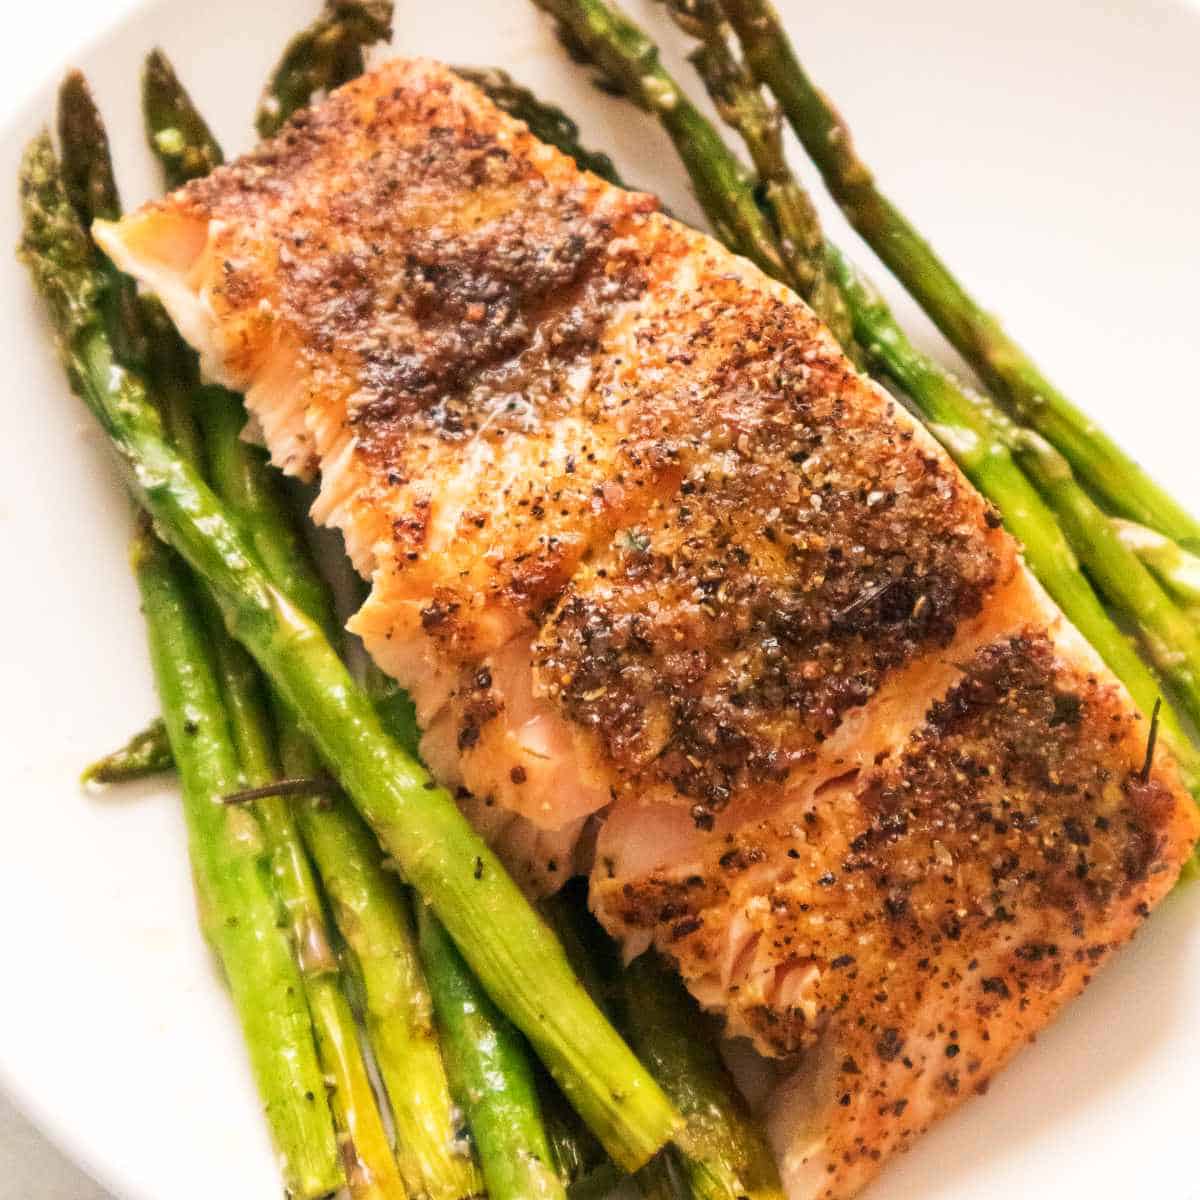 plate of salmon and asparagus on a white background.